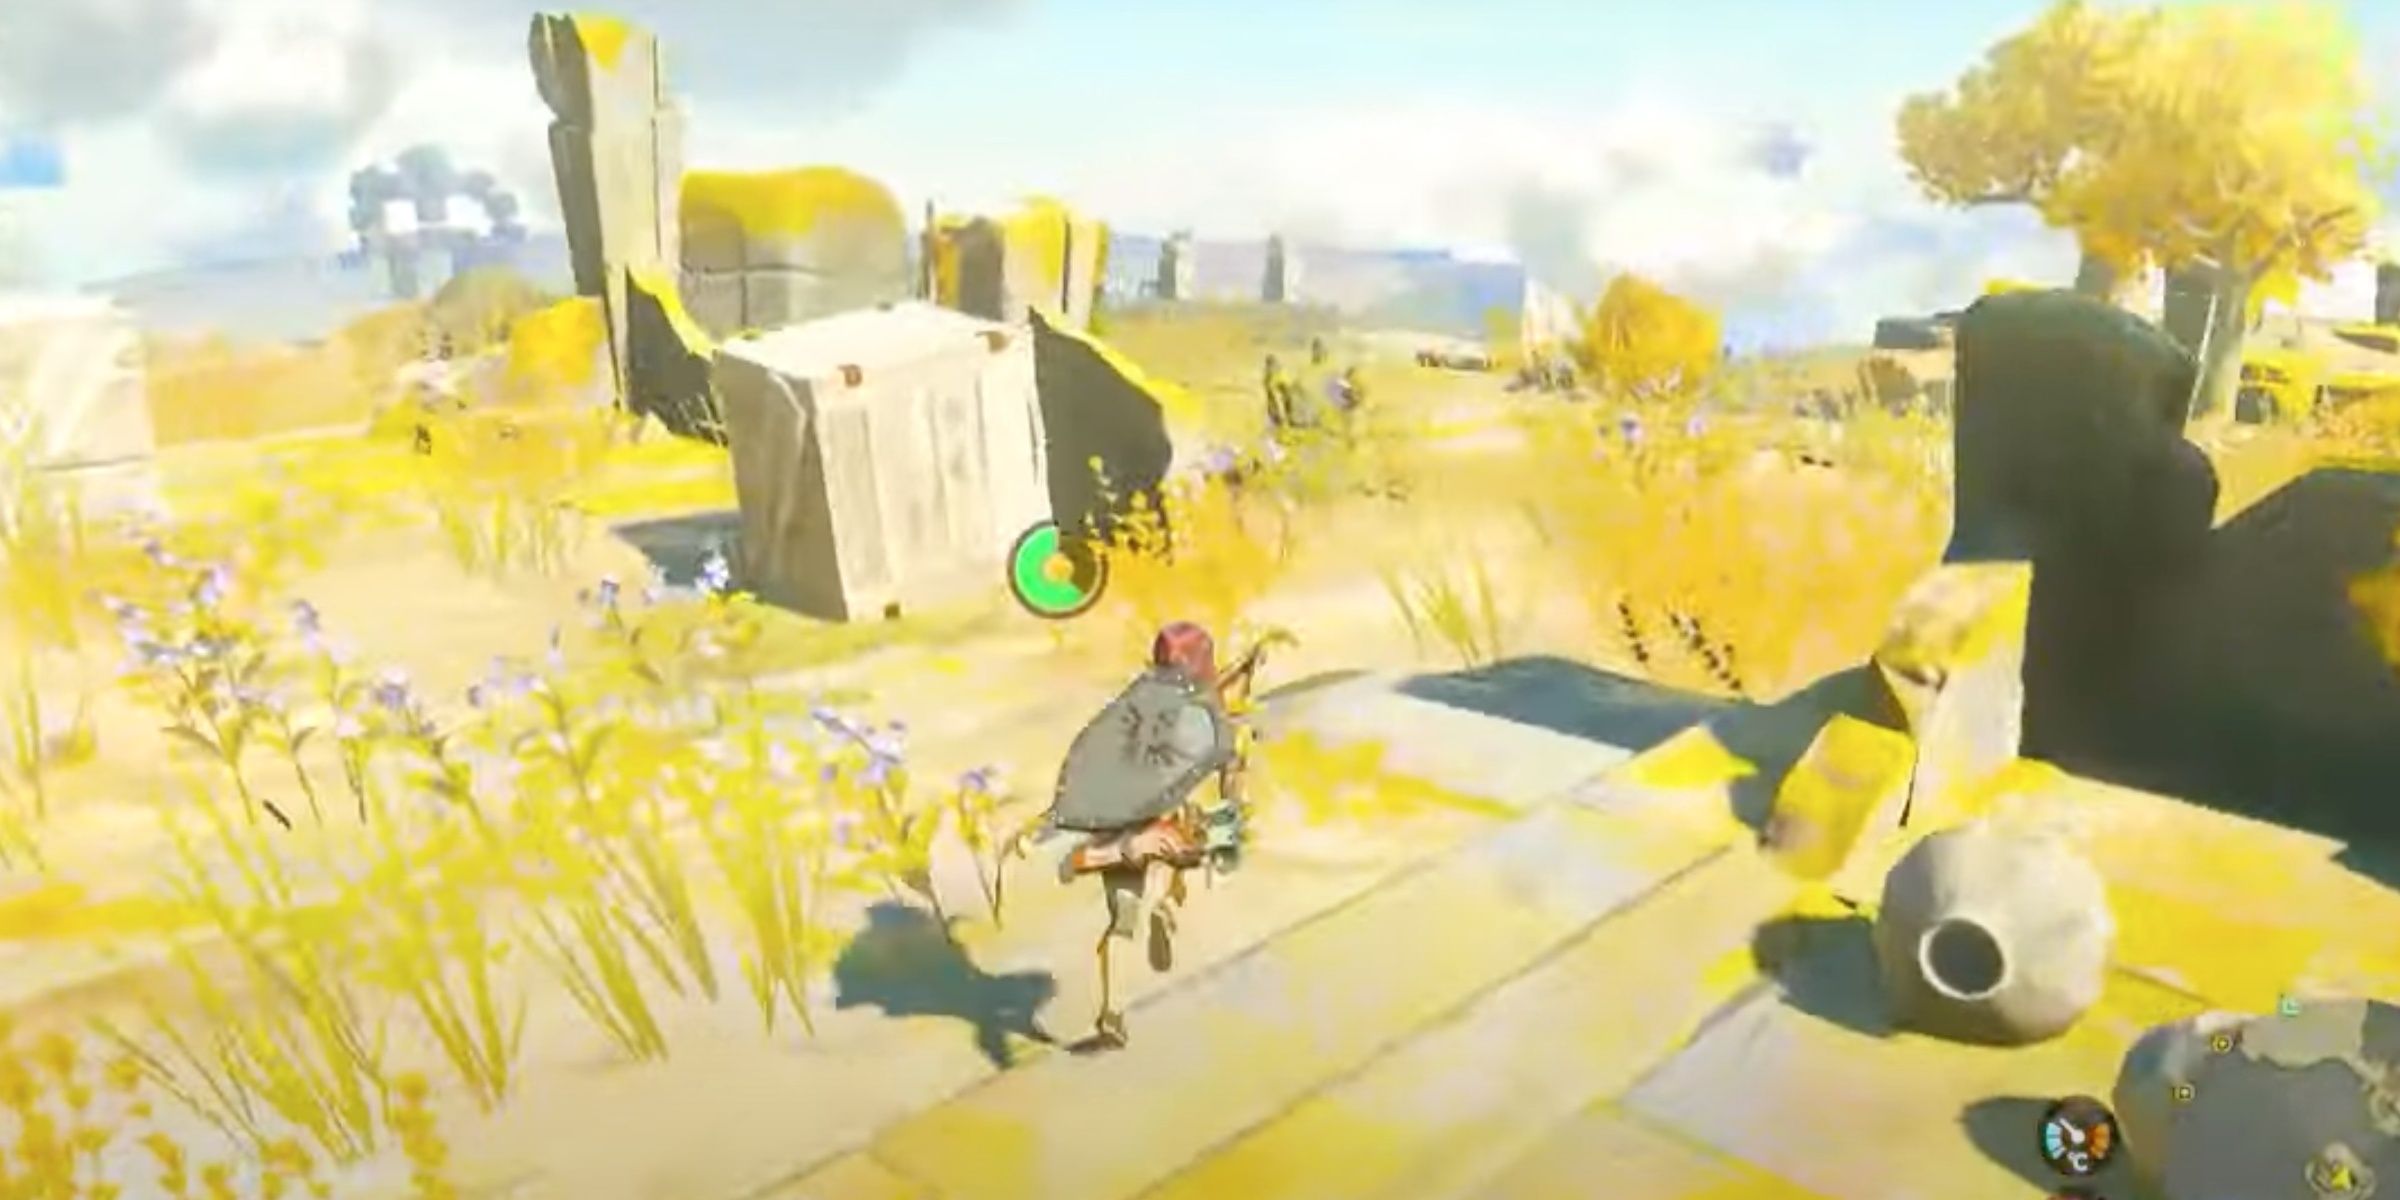 In The Legend of Zelda: Kingdom of Tears, Link is running with a Construct in the distance.